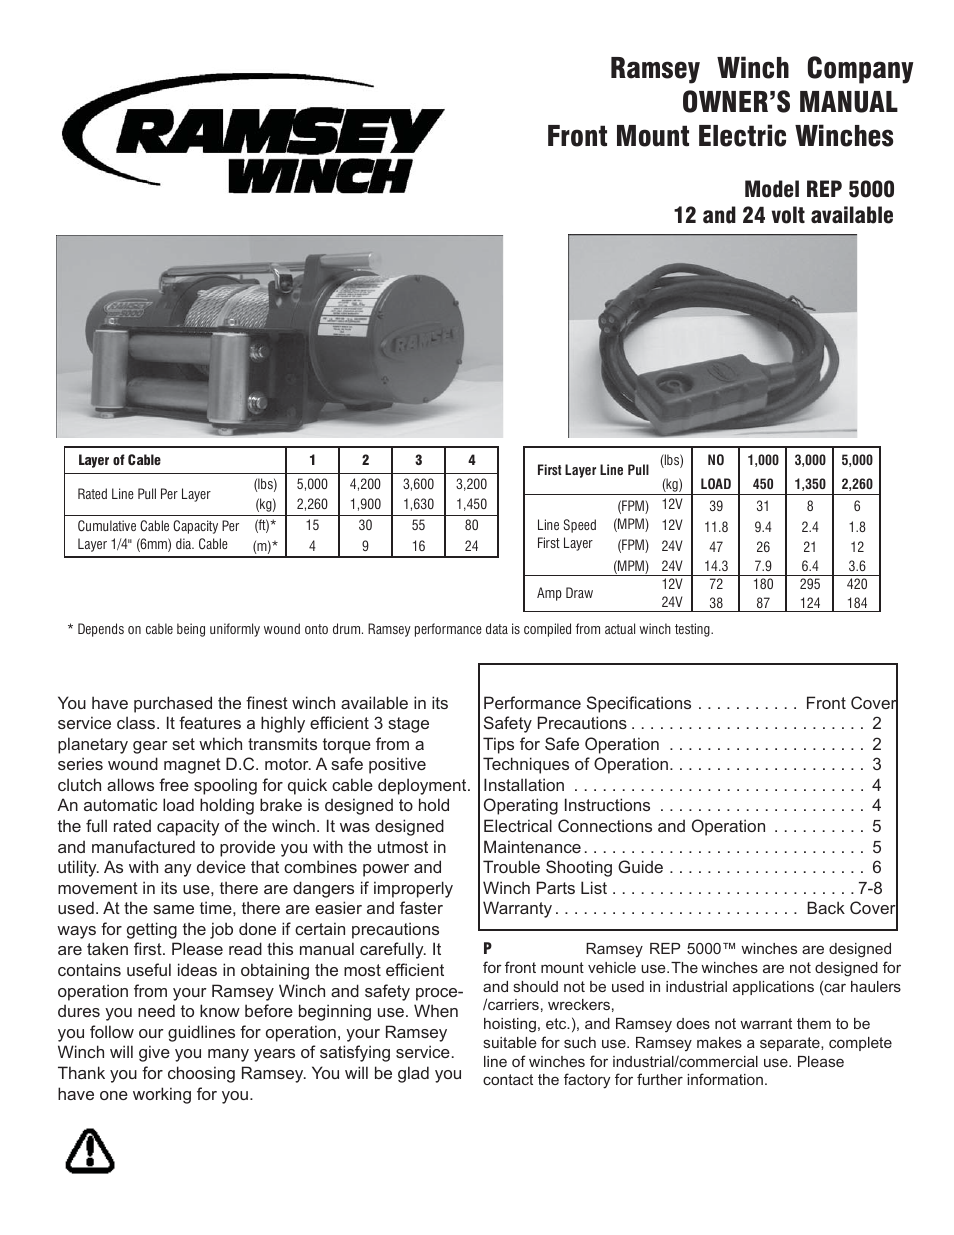 Ramsey Winch REP-5000 (SERIES WOUND MOTOR) User Manual | 10 pages